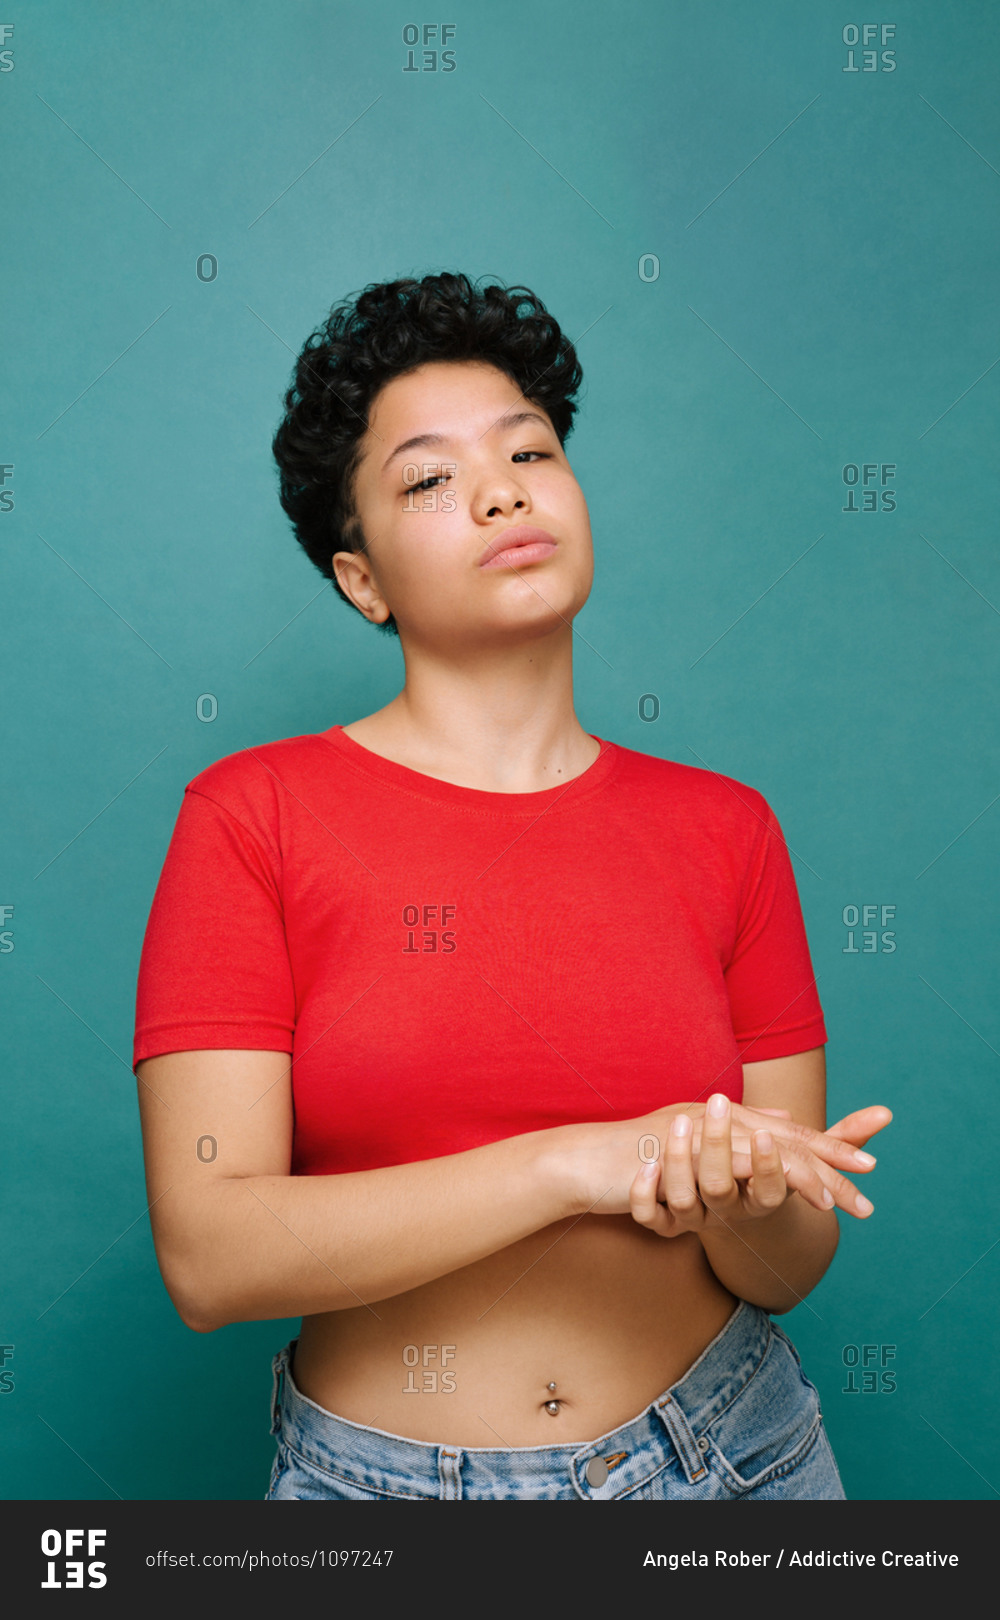 Young Latina woman holding her own hands with a red t-shirt, media shot, isolated vertical photo, tidewater green background